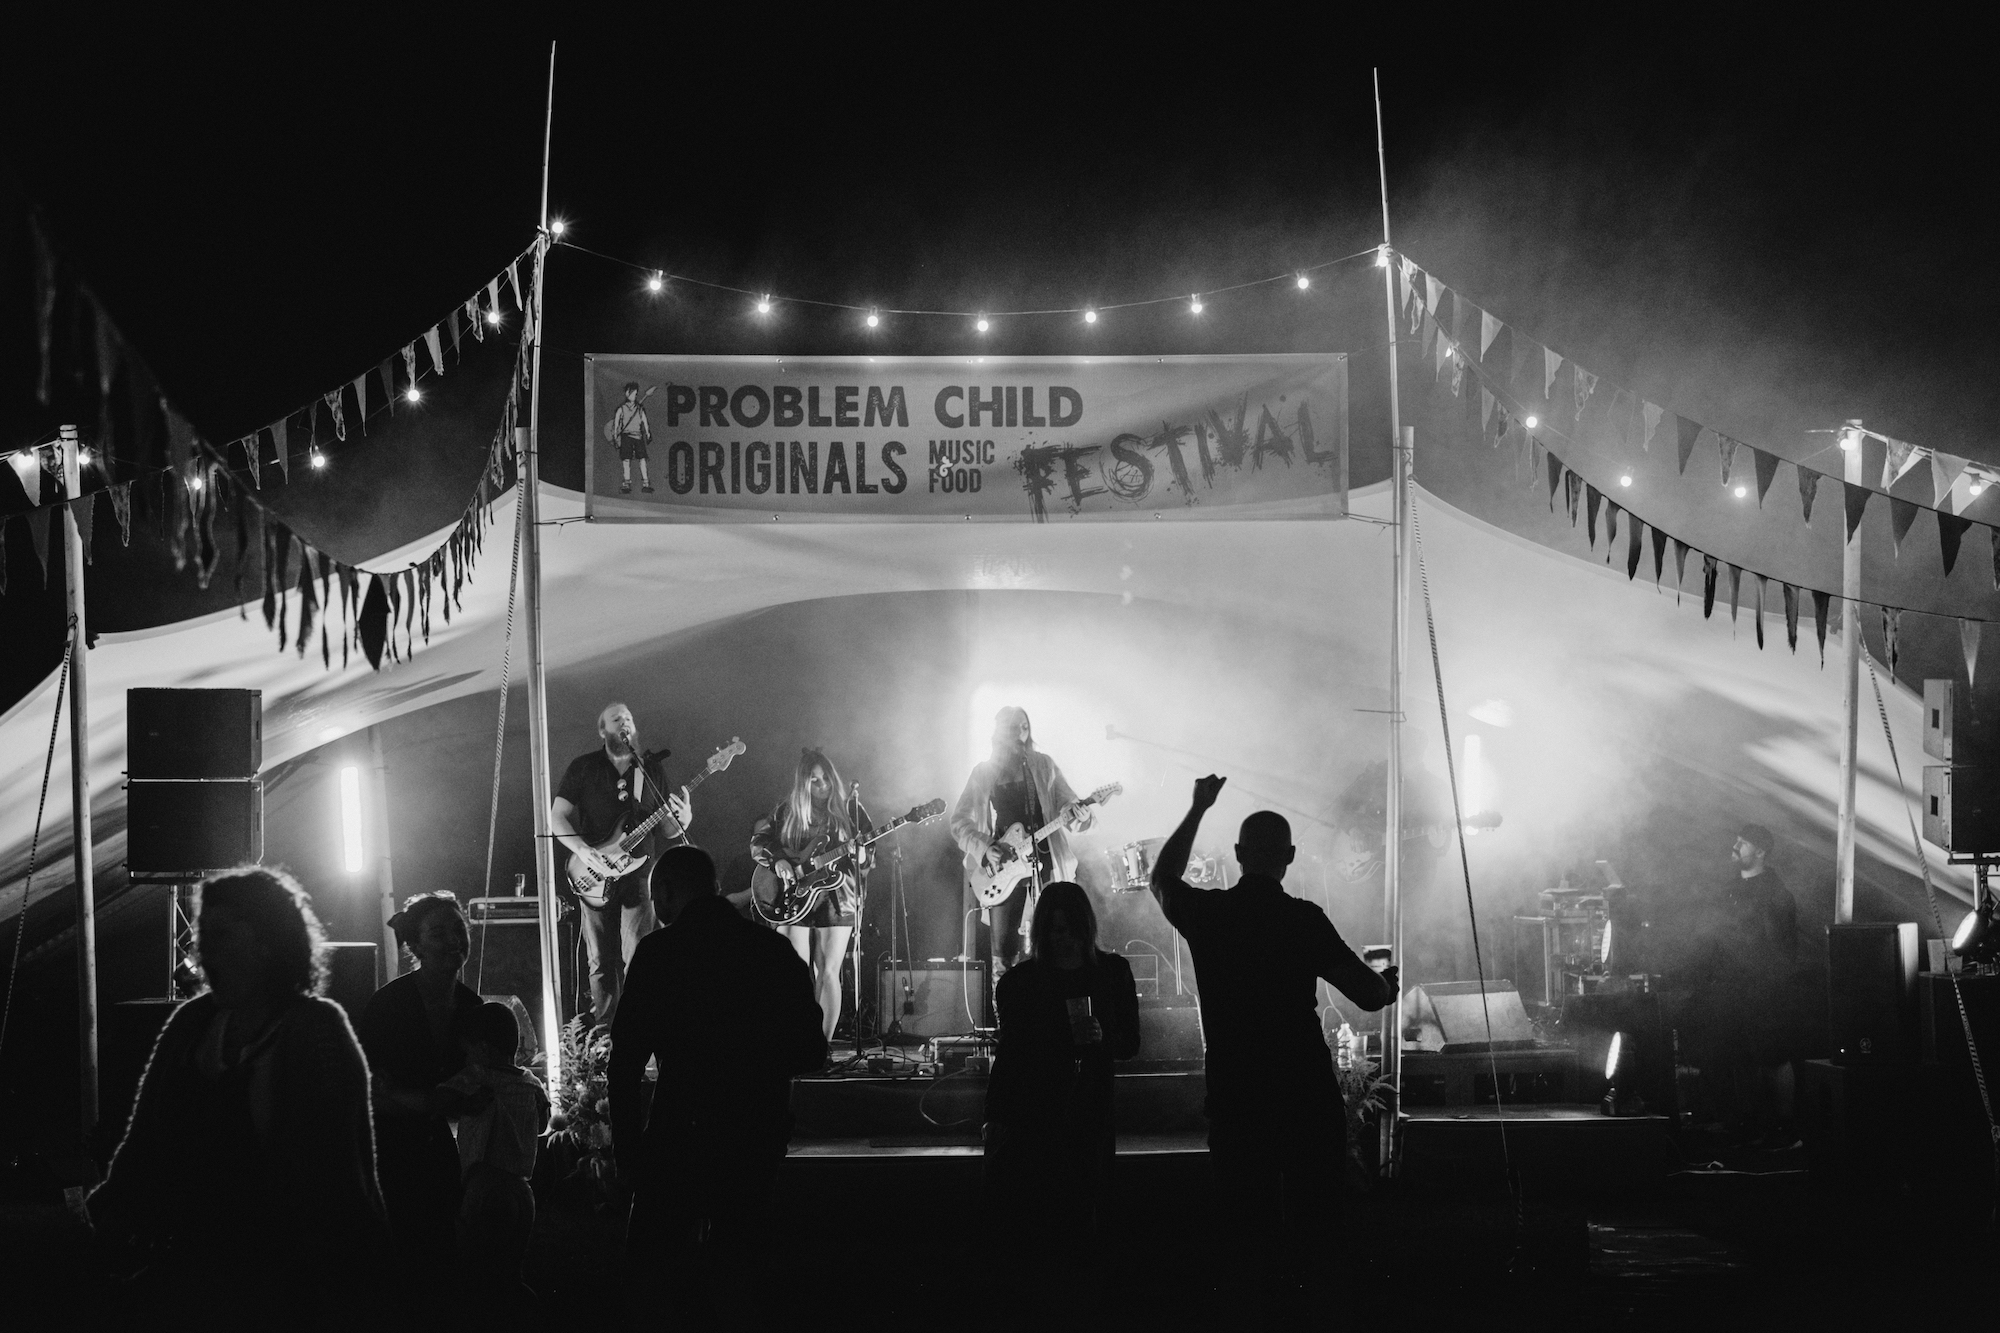 Black and white photograph of the crowd dancing in front of the stage at Problem Child Originals Music Festival